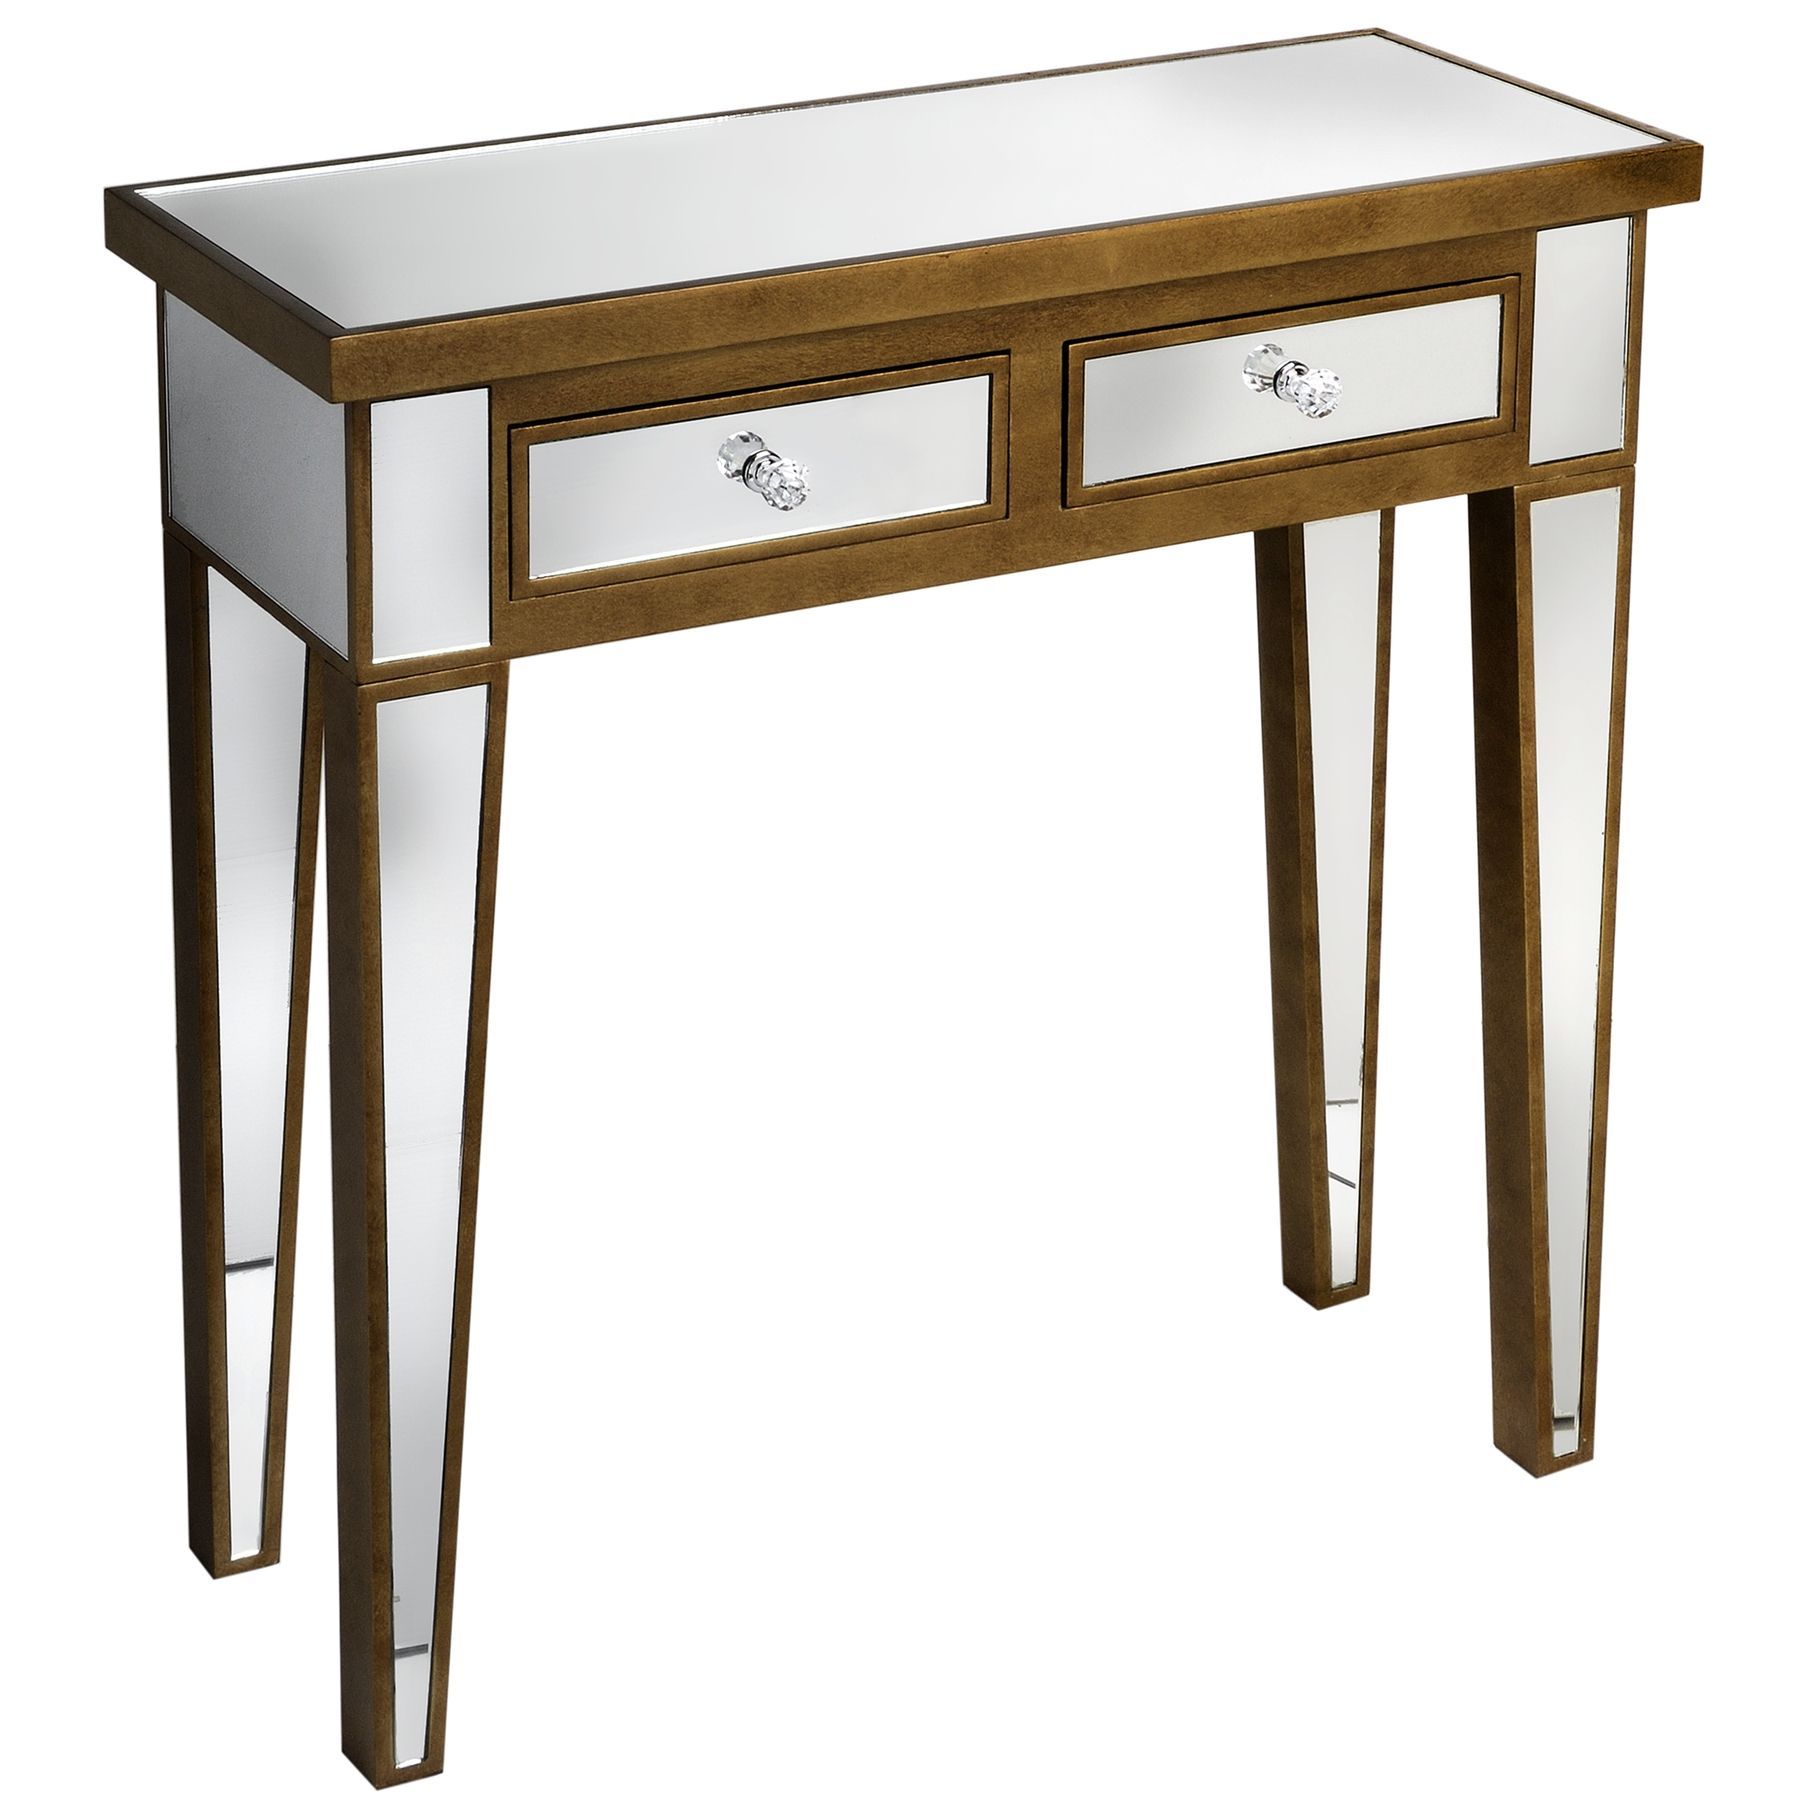 Venetian Mirrored 2 Drawer Console Table | Mirrored Console Table In 2 Drawer Oval Console Tables (View 8 of 20)